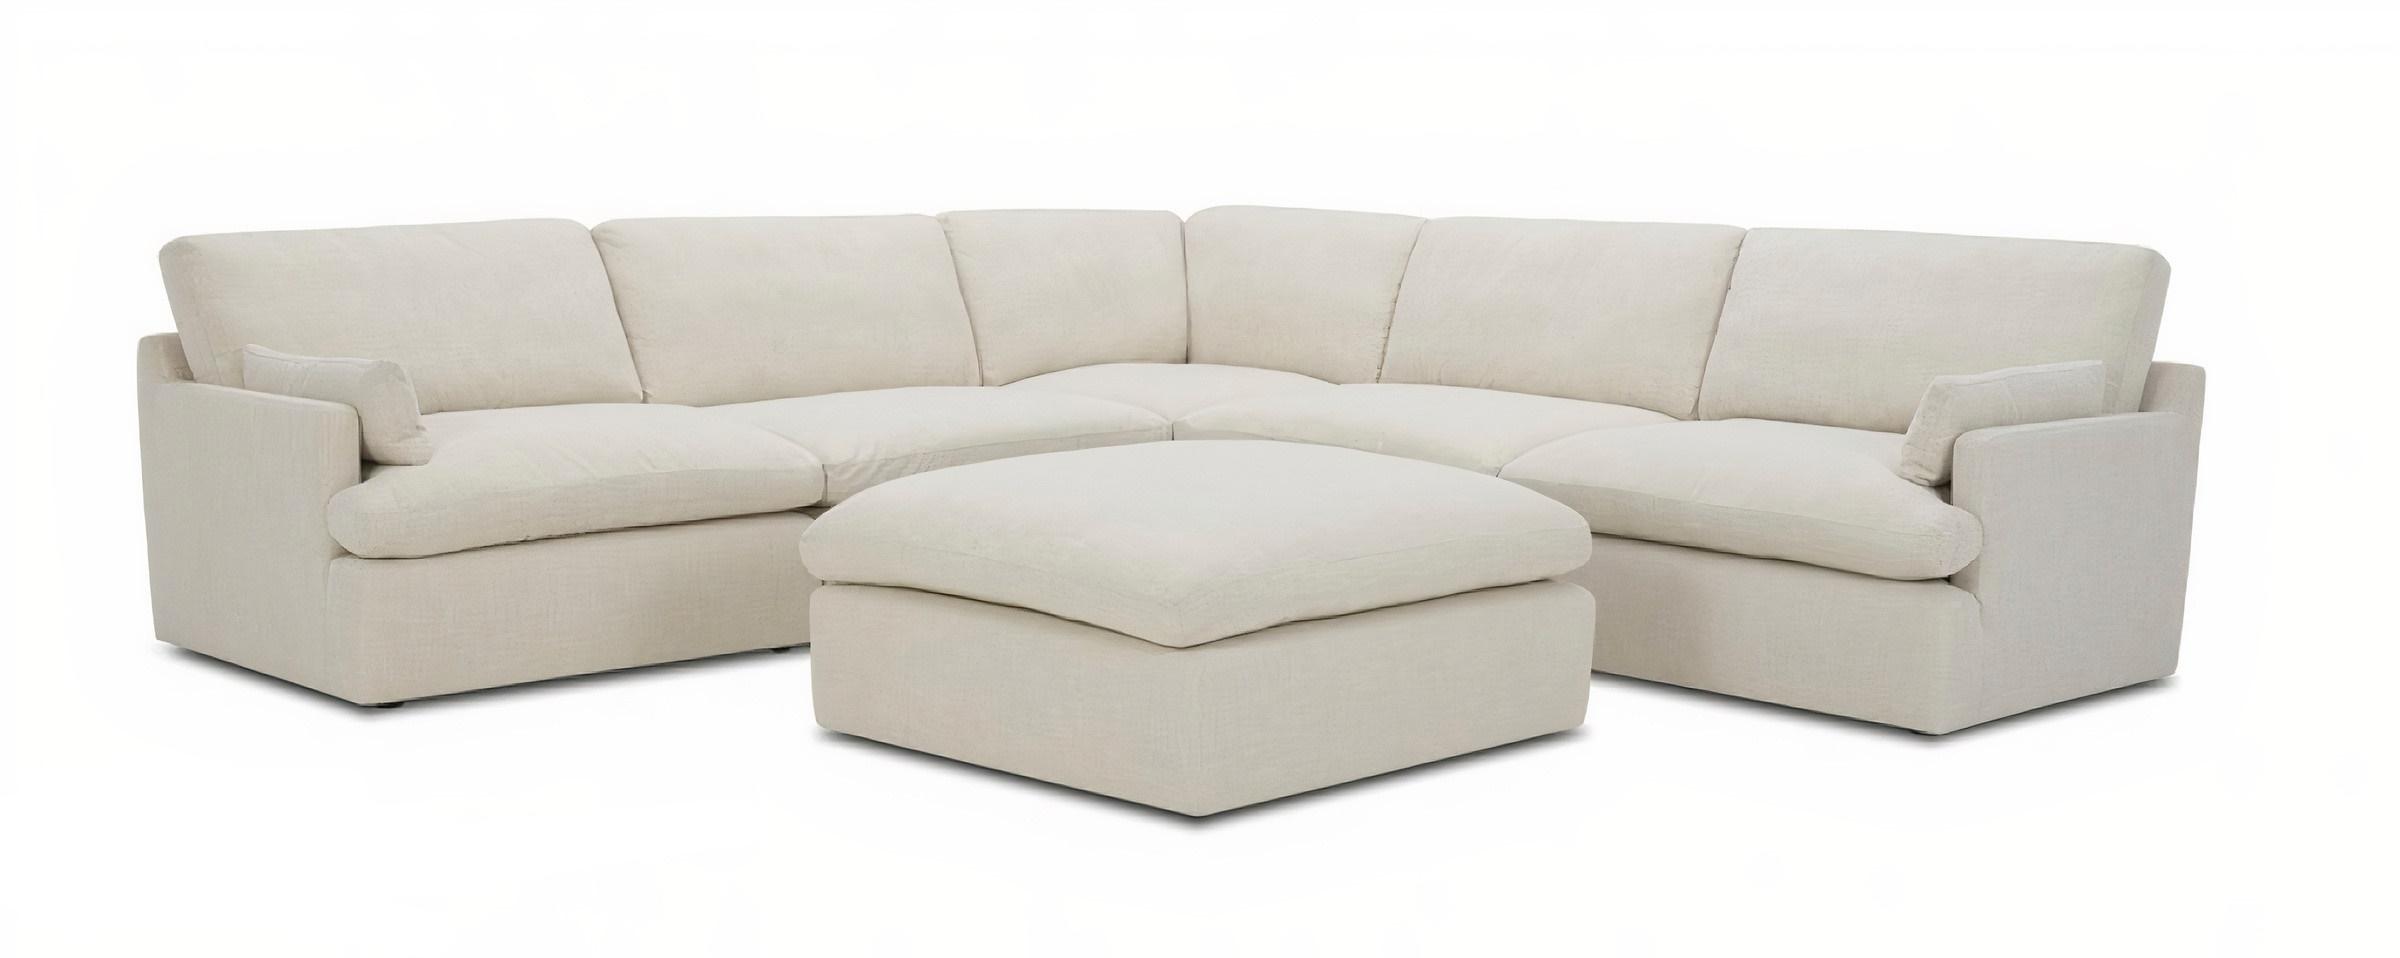 Contemporary, Modern Sectional Sofa Danica VGKK-KF2650-GRY-SECT in White, Gray Leather